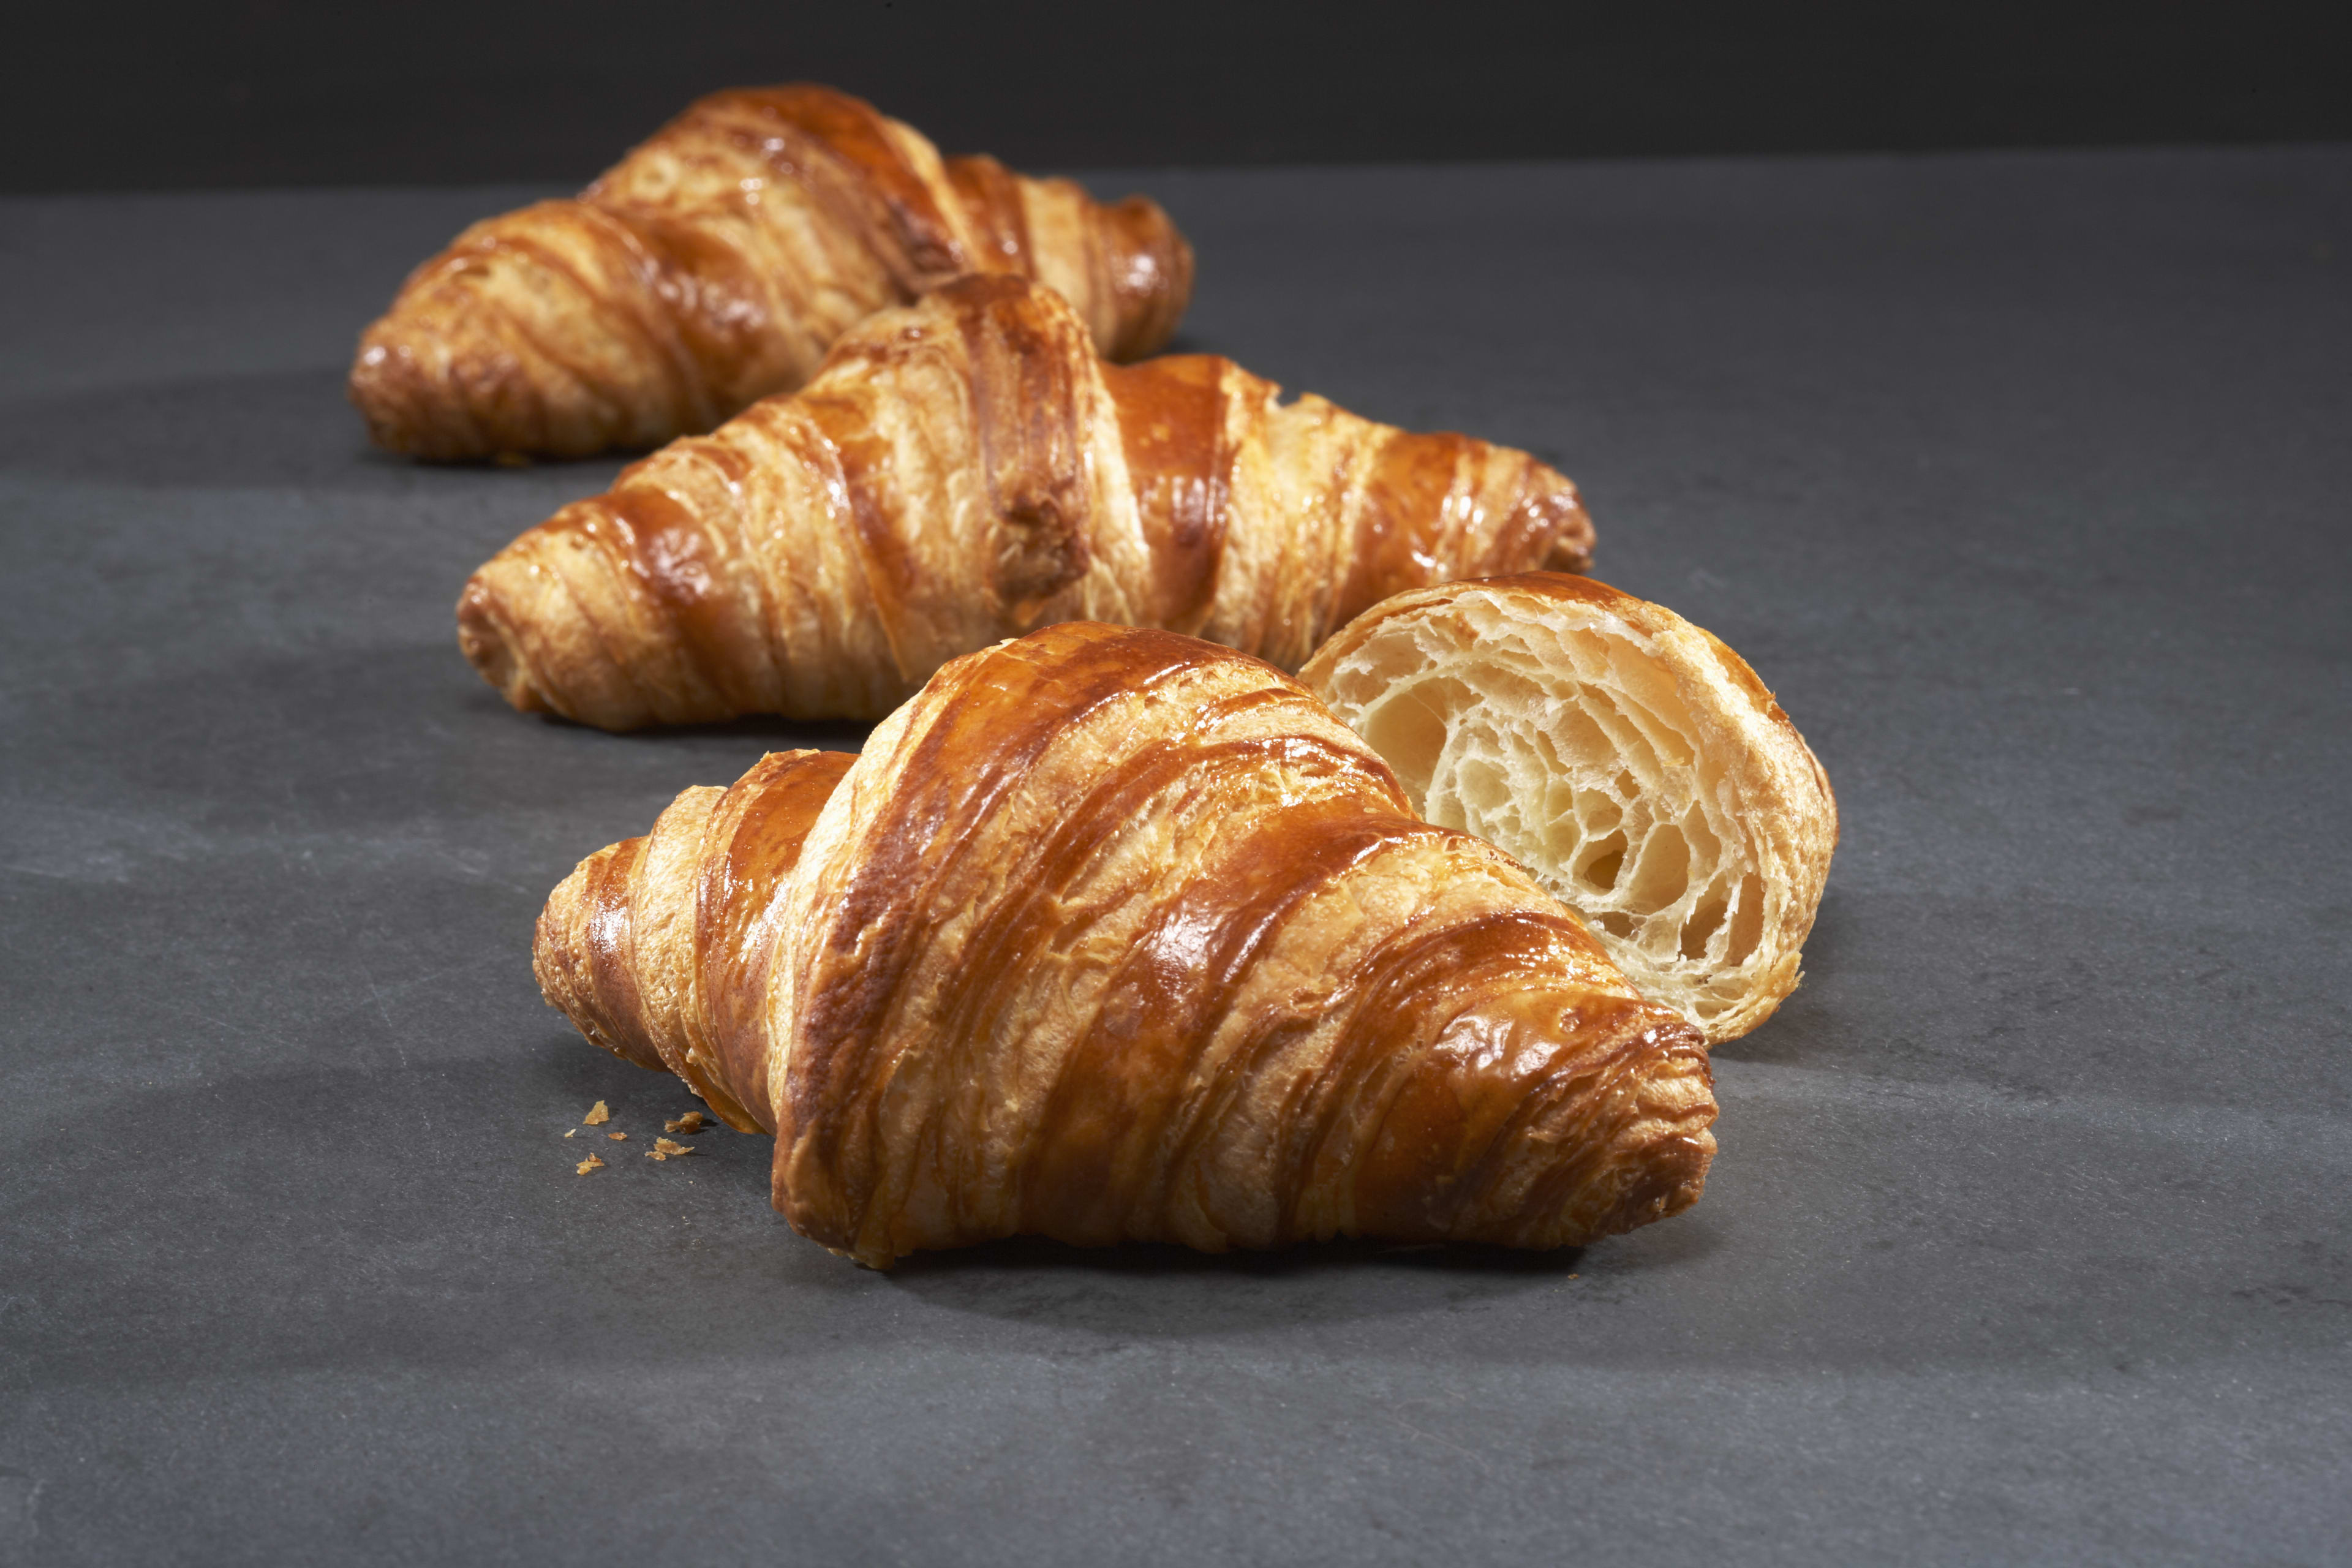 Three flaky butter croissants from Au Pain Doré bakery in Toronto.